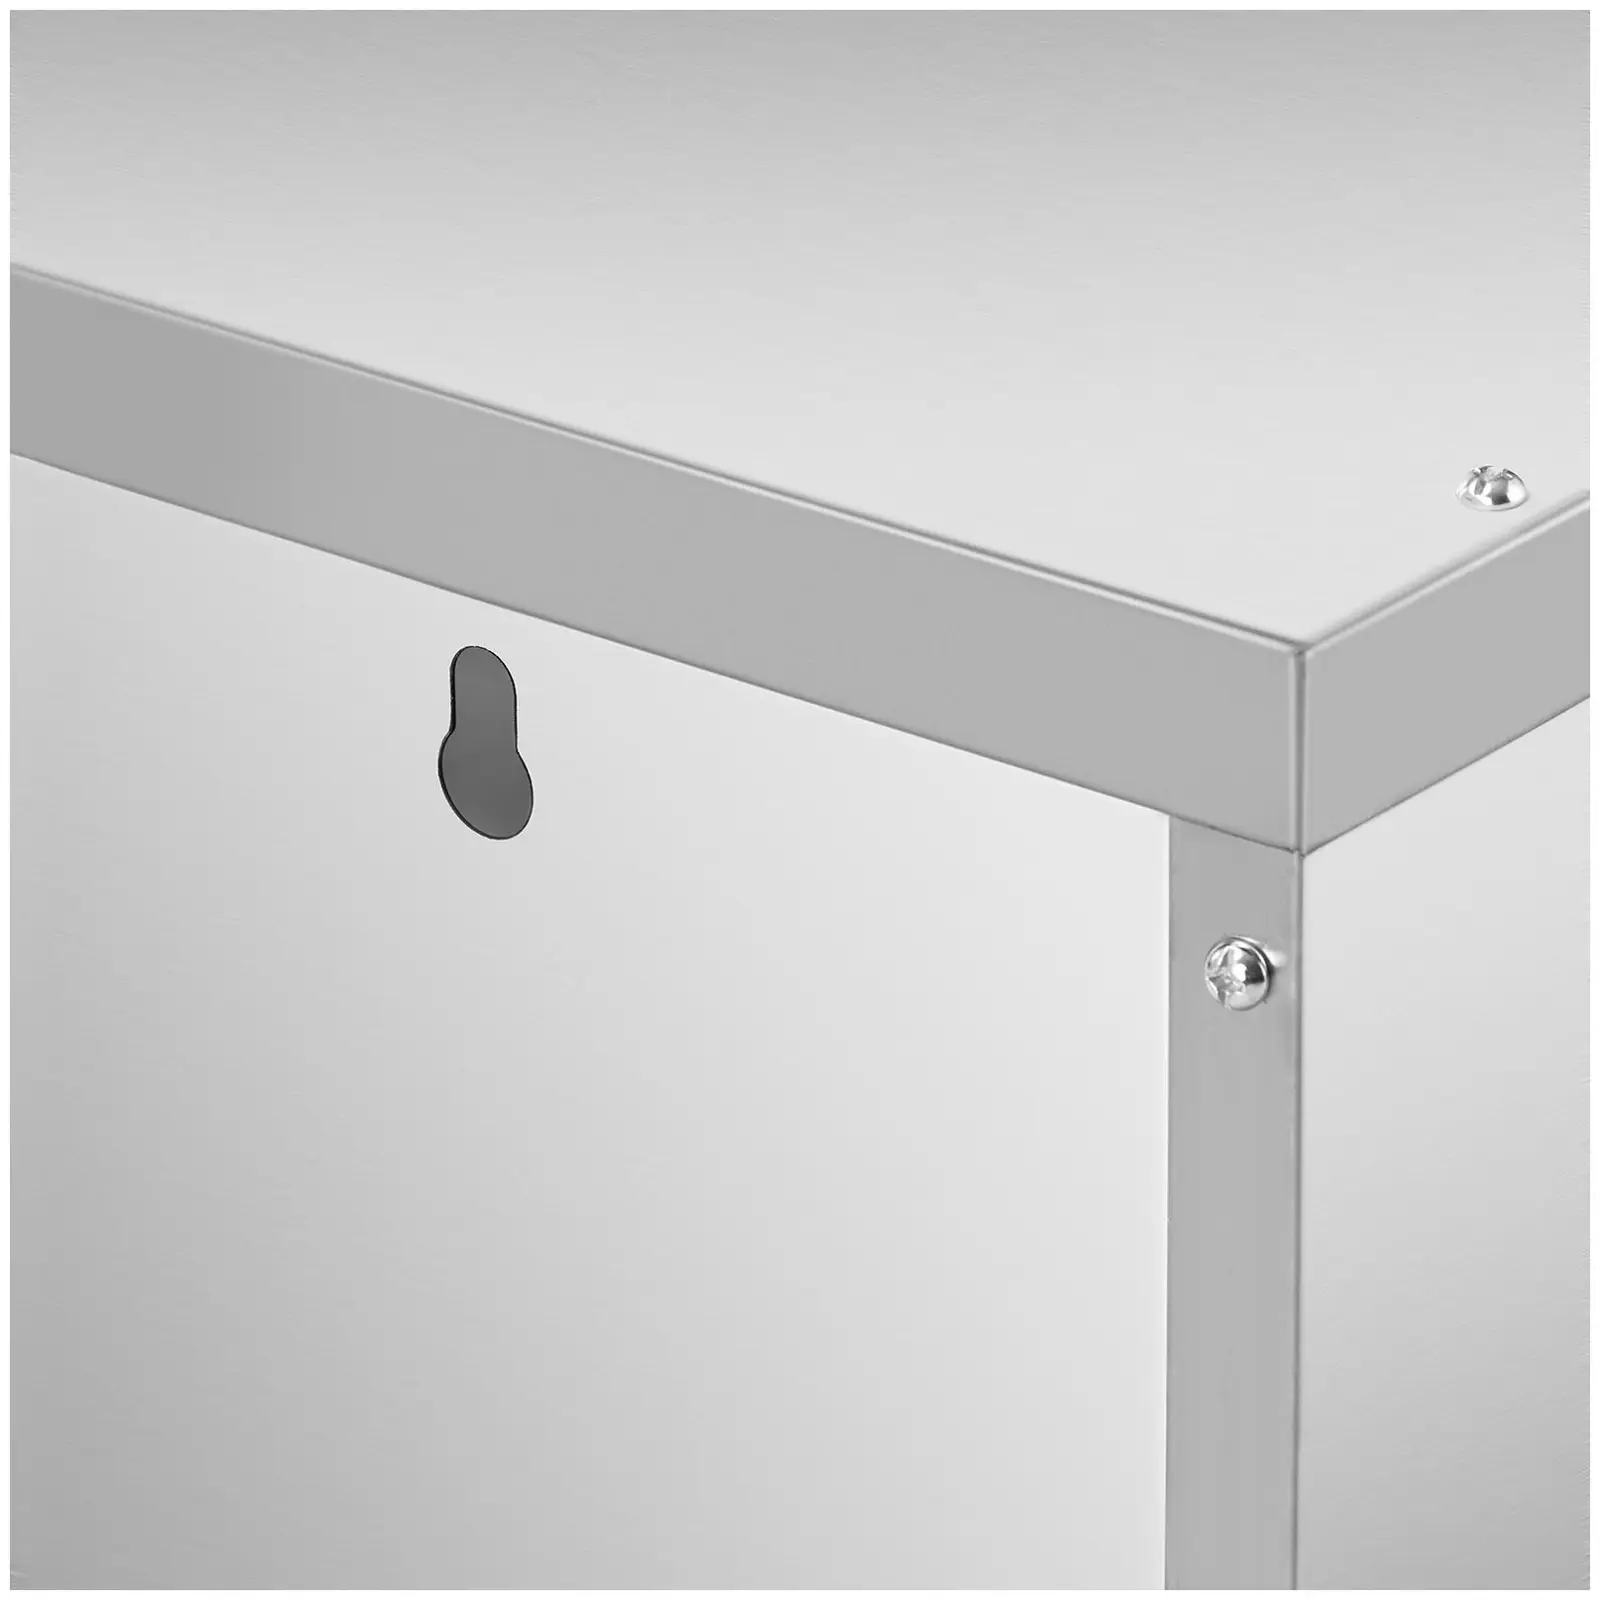 Hanging Cabinet - 1,500 x 400 x 500 mm - 85 kg load capacity per compartment - Royal Catering